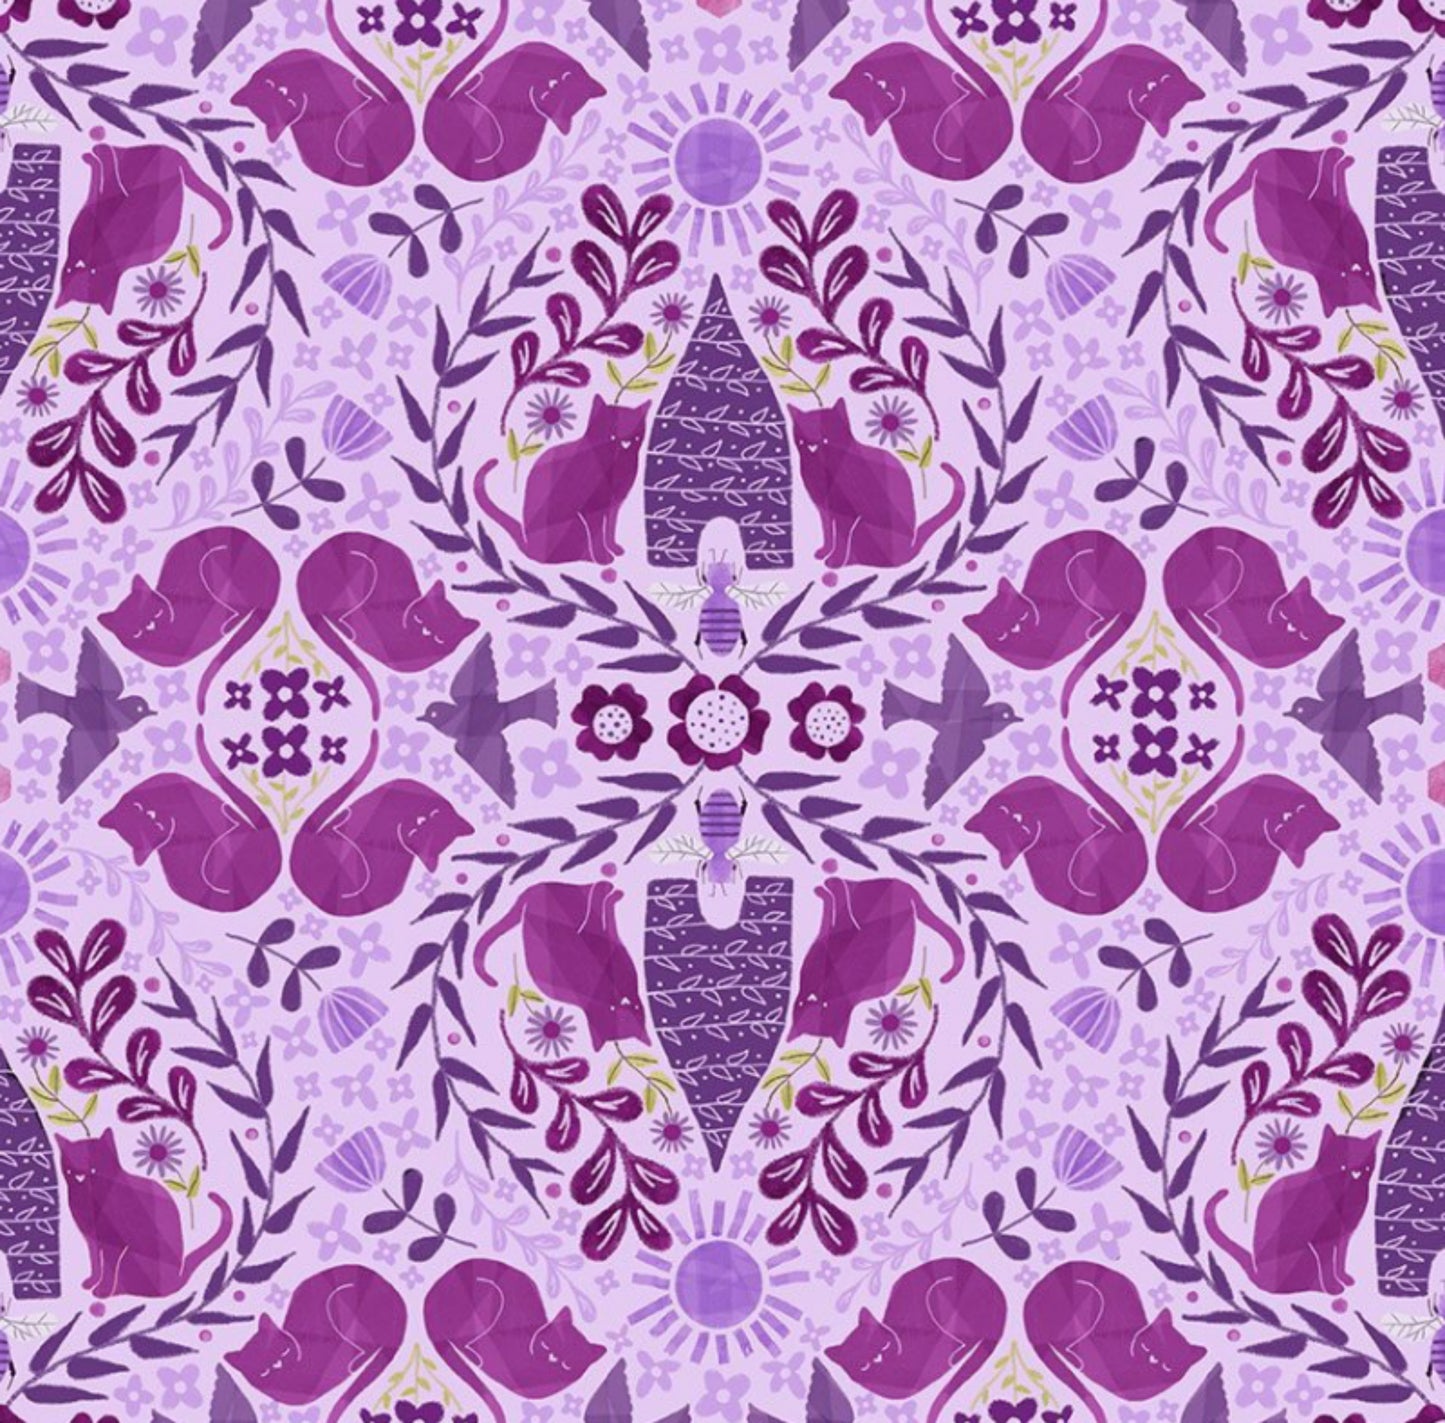 Hive Mind Fabreic in Grape - from the Curious Garden Collection by Pammie Jane for Dear Stella Fabrics - light purple fabric with hidden cats and beehives.